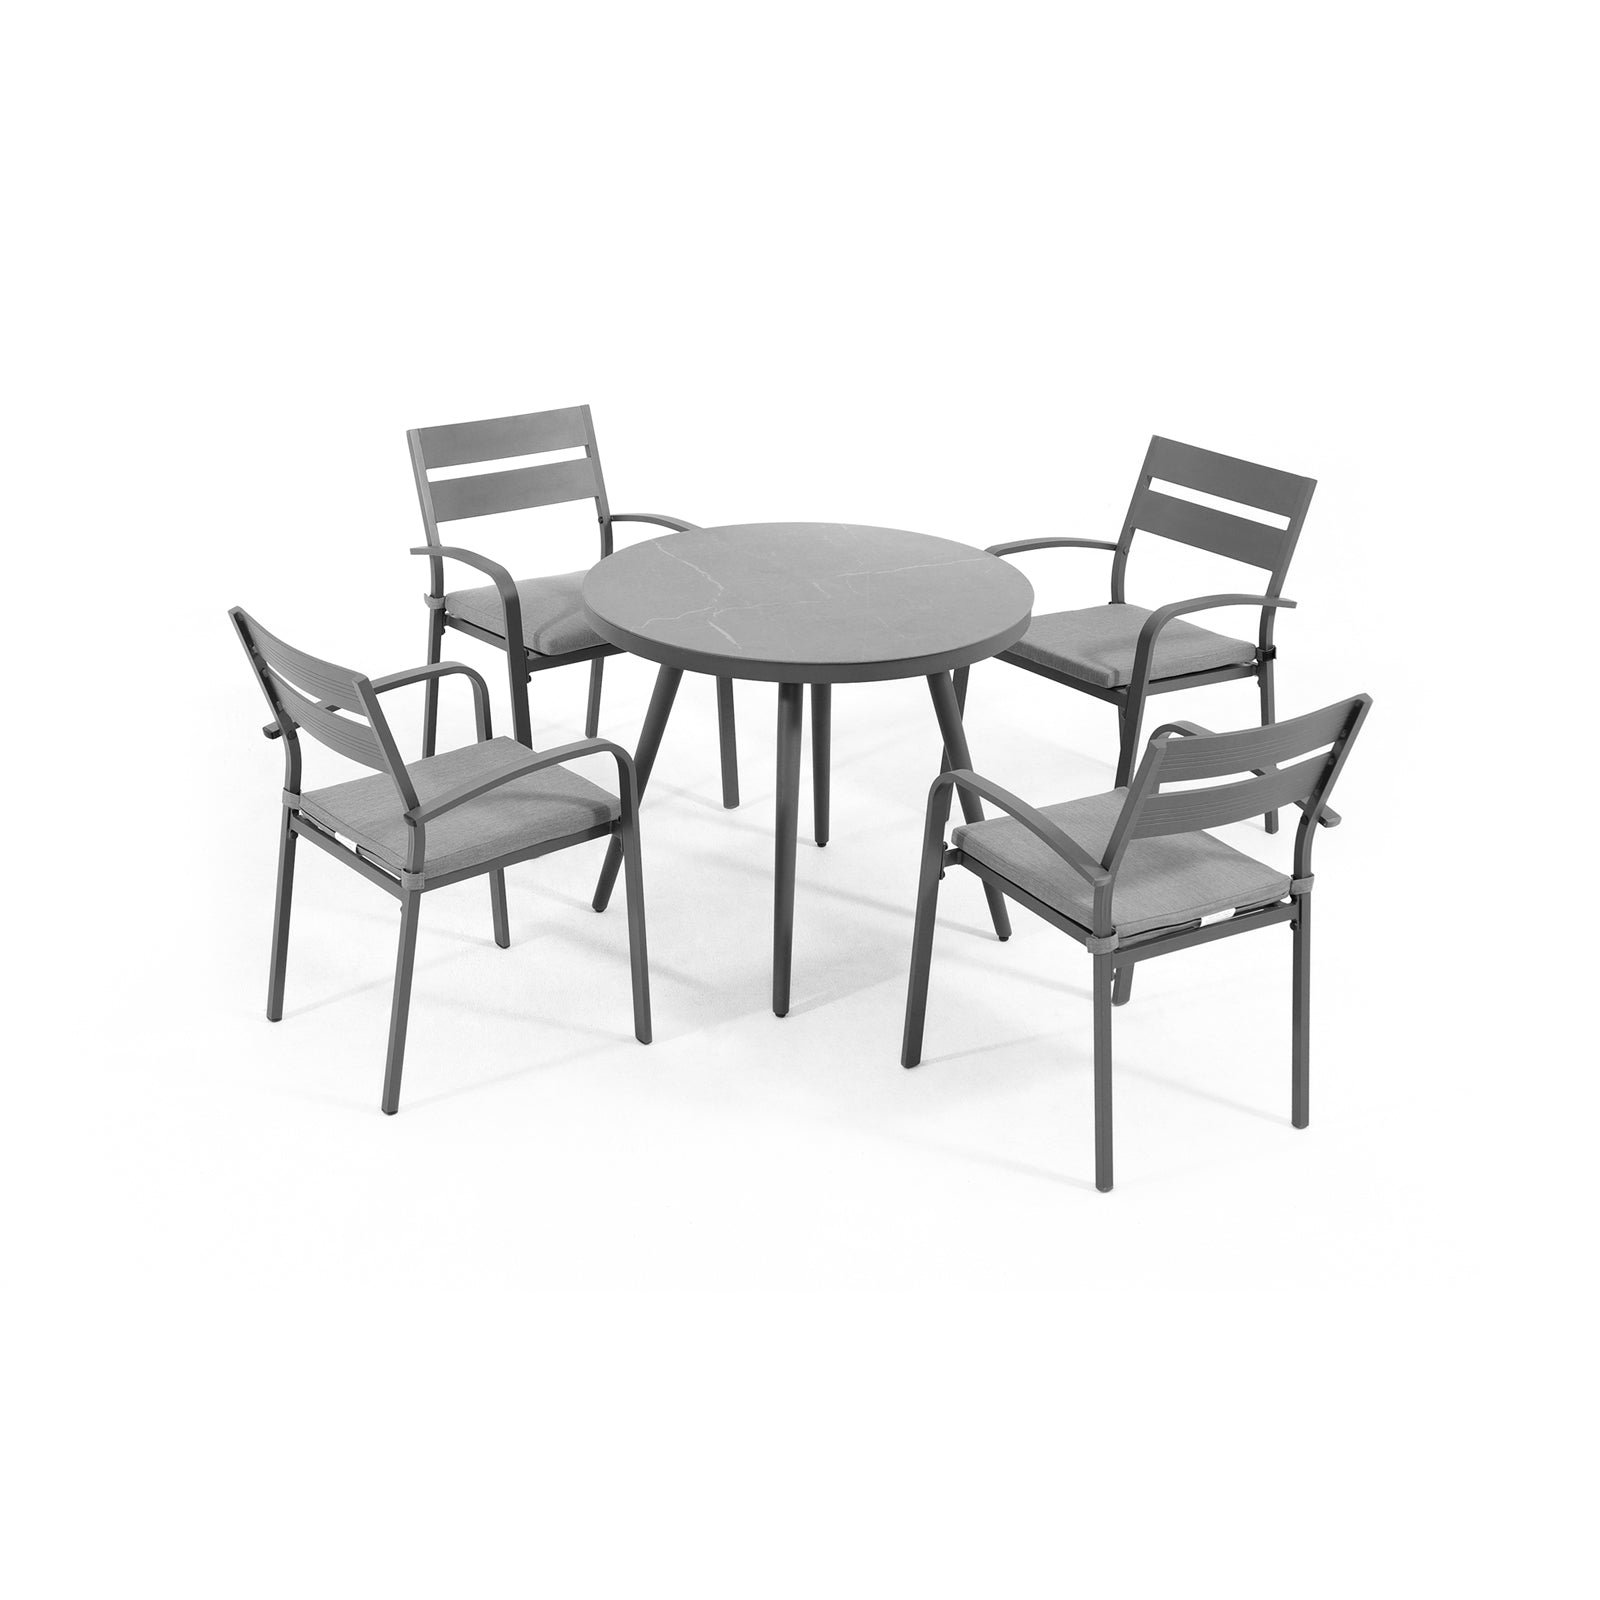 Salina Modern Aluminum Outdoor Furniture, 4-person grey aluminum frame contemporary outdoor dining set, 1 round dining table, 4 dining chairs with grey cushions - Jardina Furniture